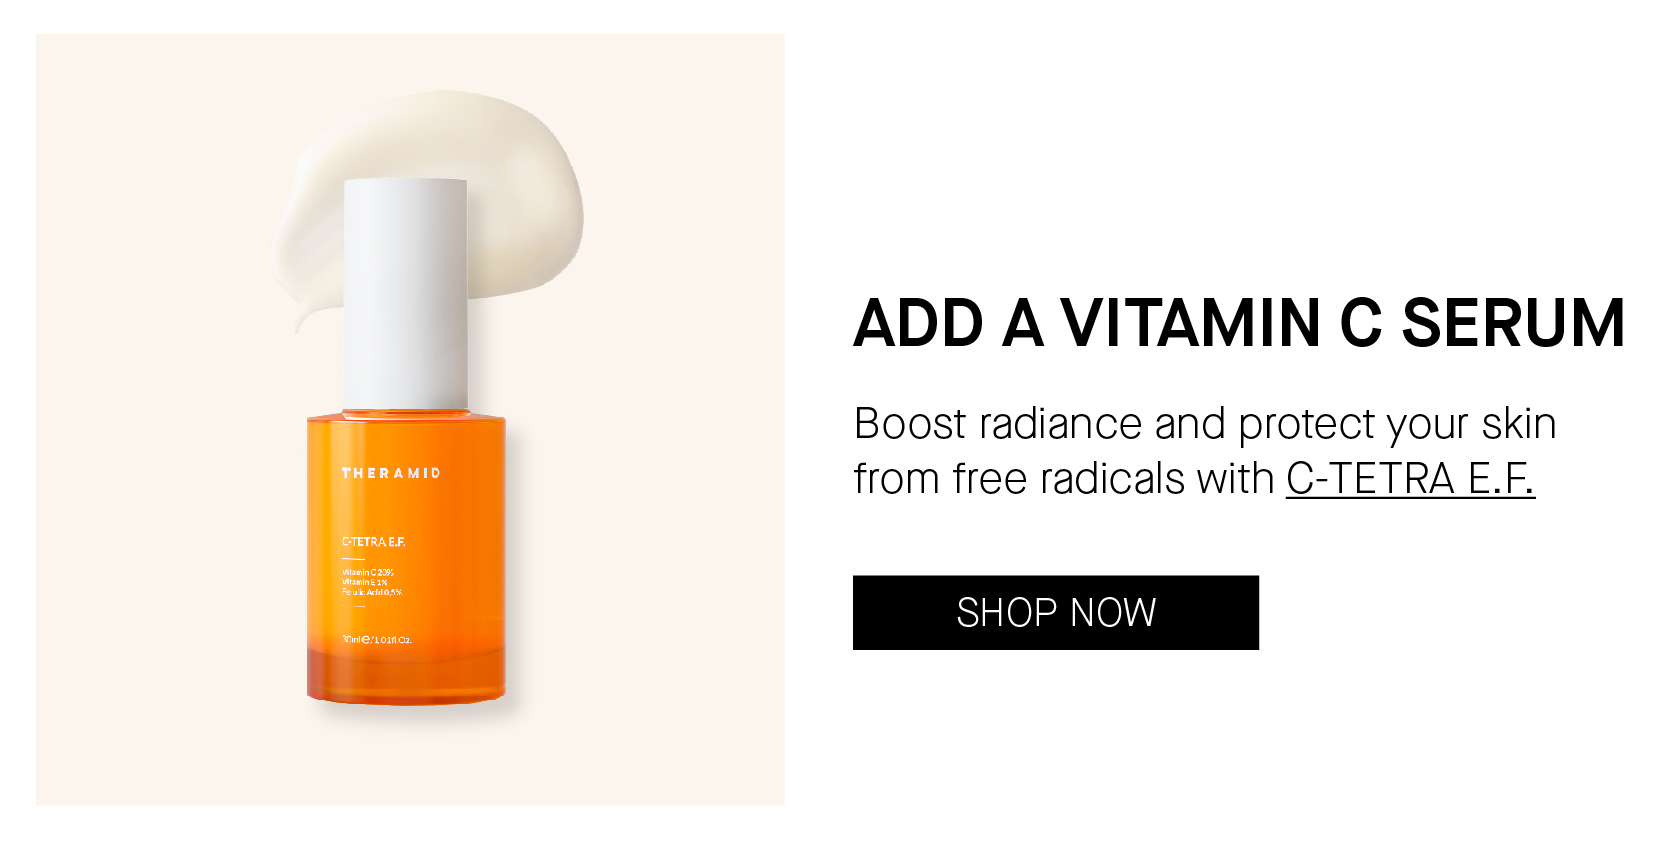 ADD A VITAMIN C SERUM 7 Boost radiance and protect your skin from free radicals with C-TETRA E.F. 